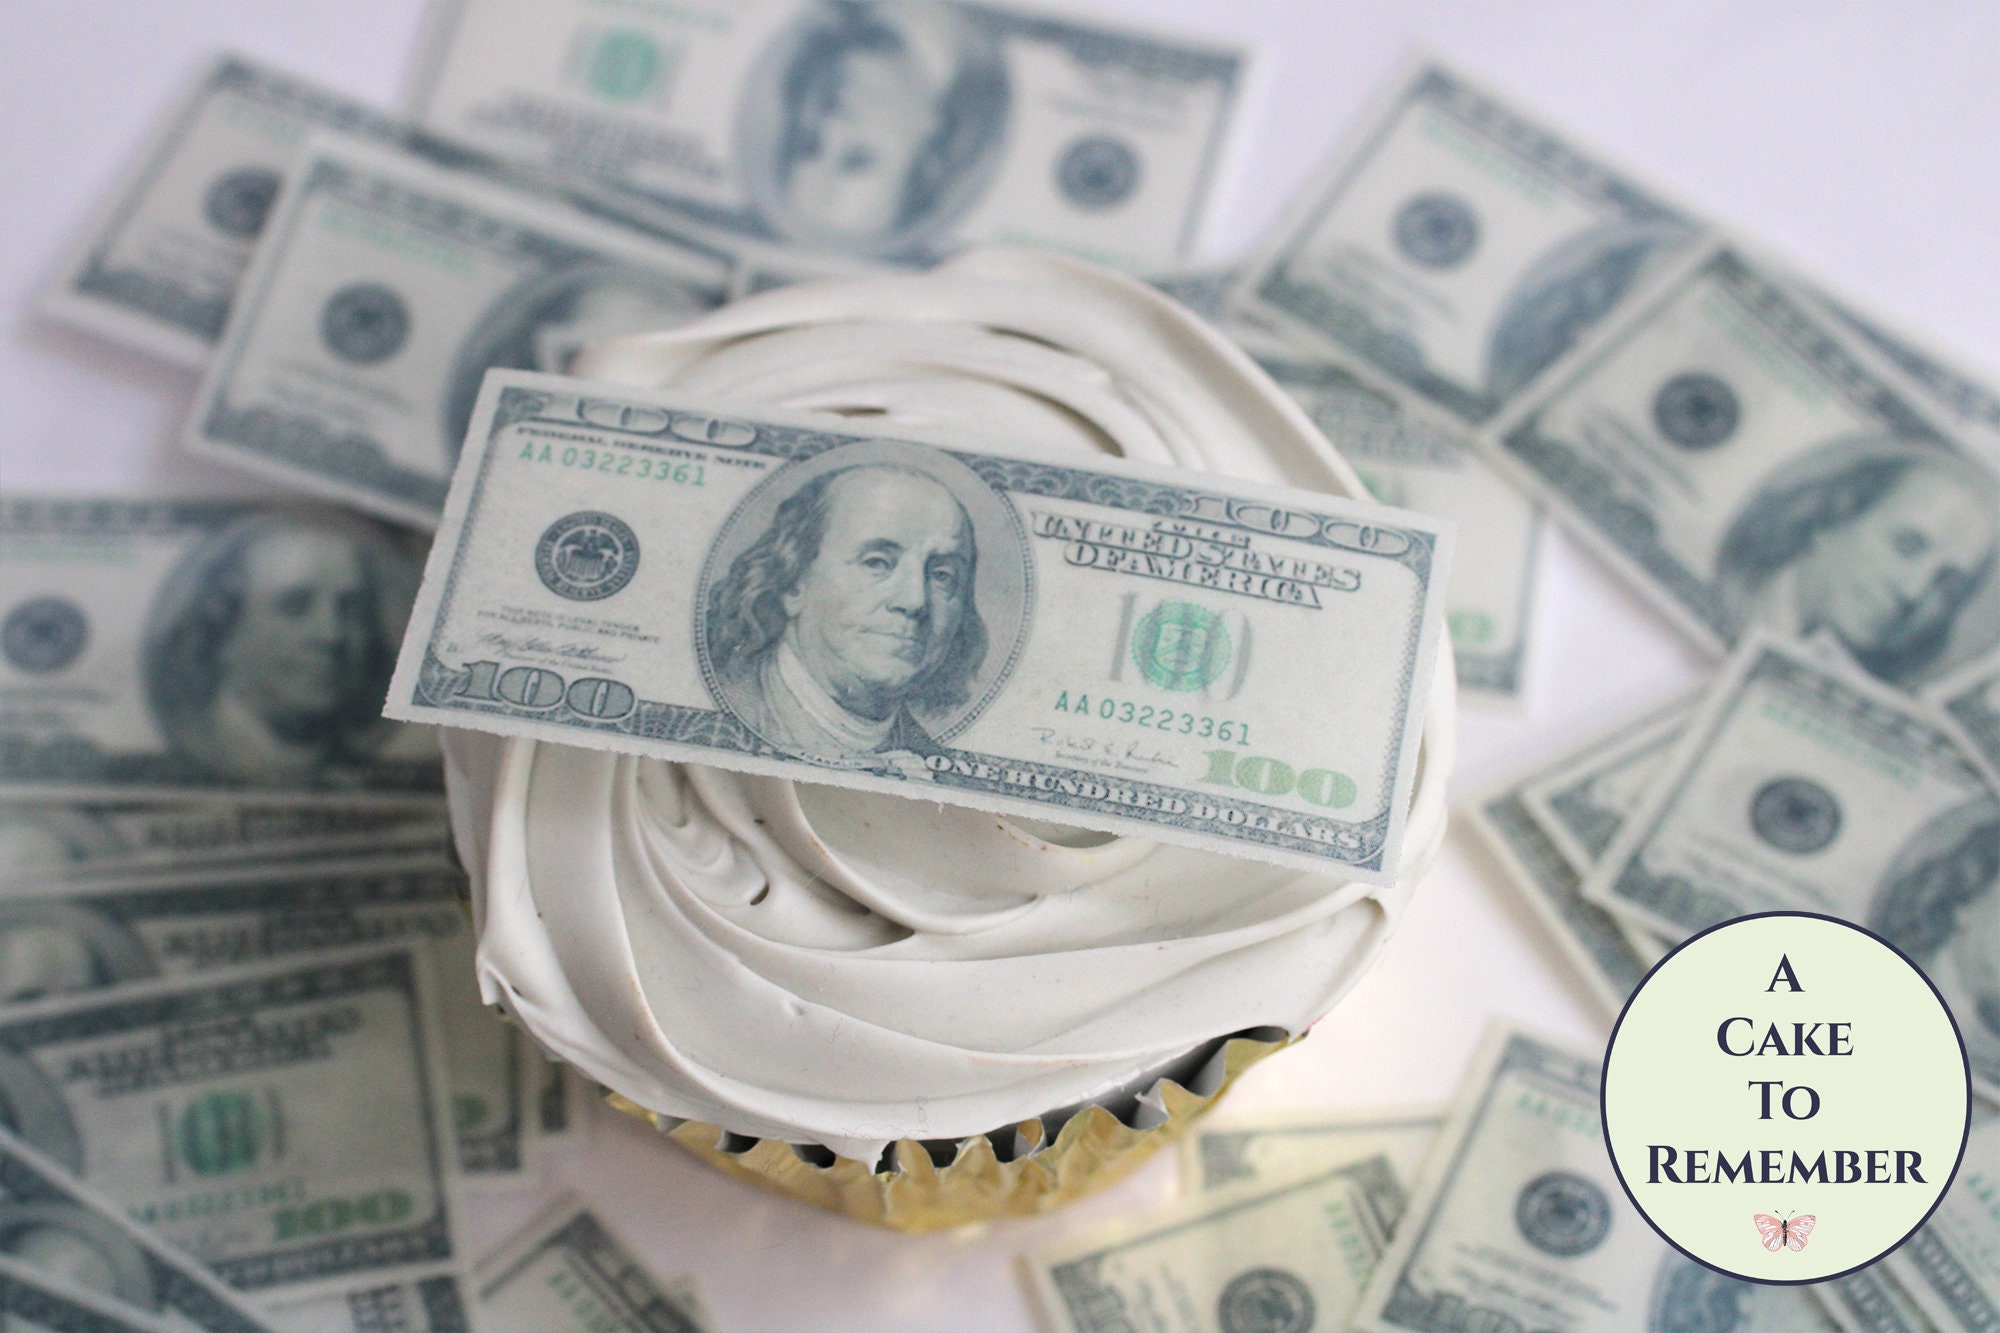 Pink, Blue, Purple Edible $100 money bills for cakes or cupcakes